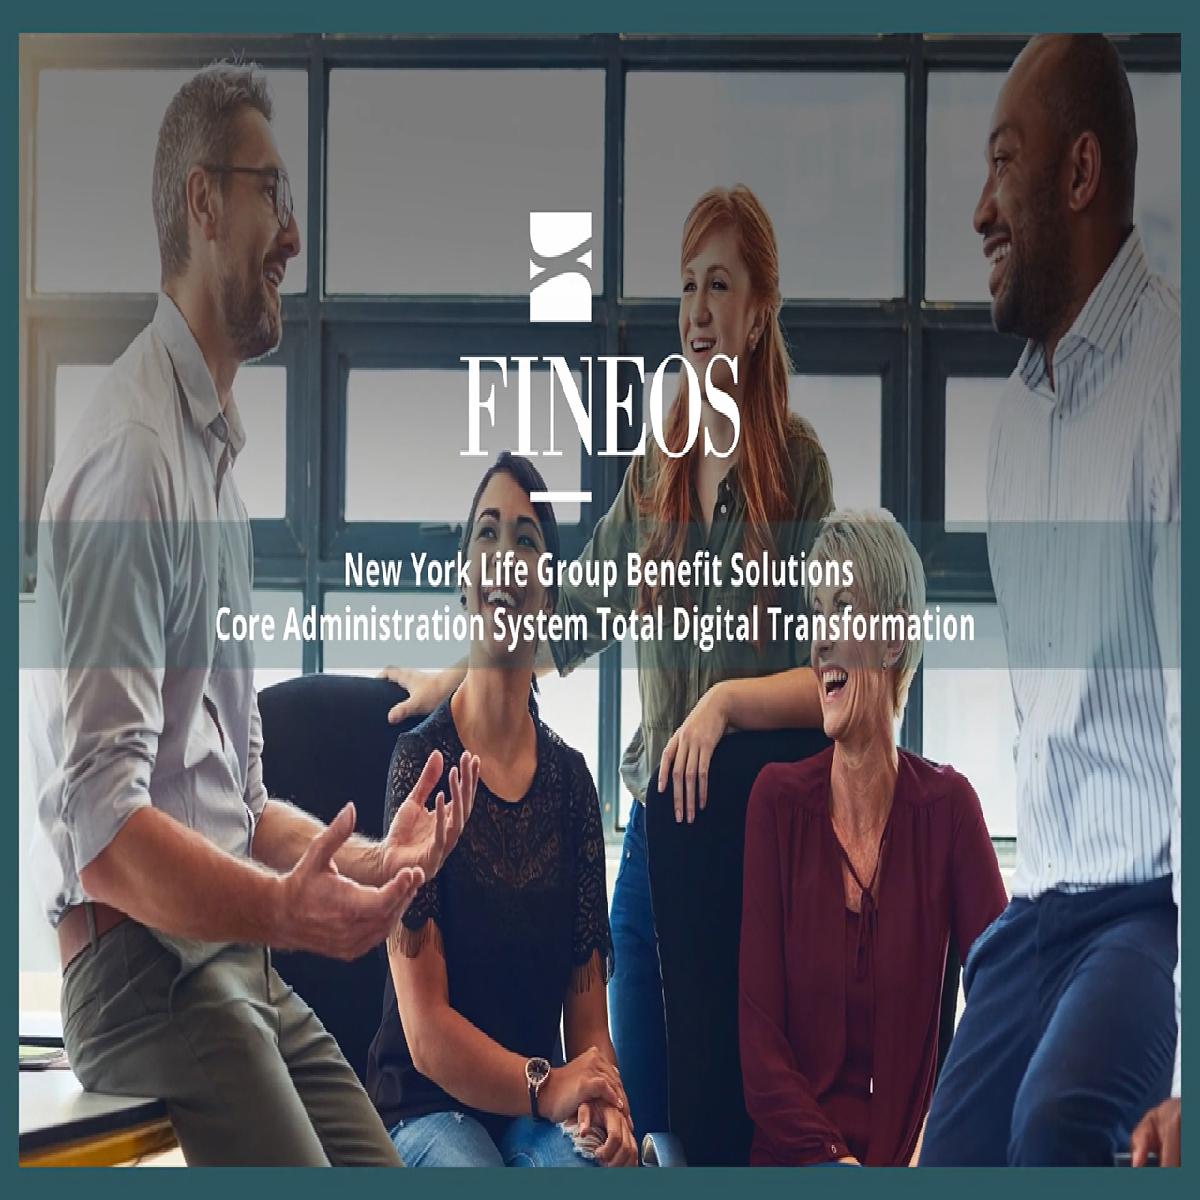 FINEOS and New York Life Group Benefit Solutions Issue Digital Transformation Case Study